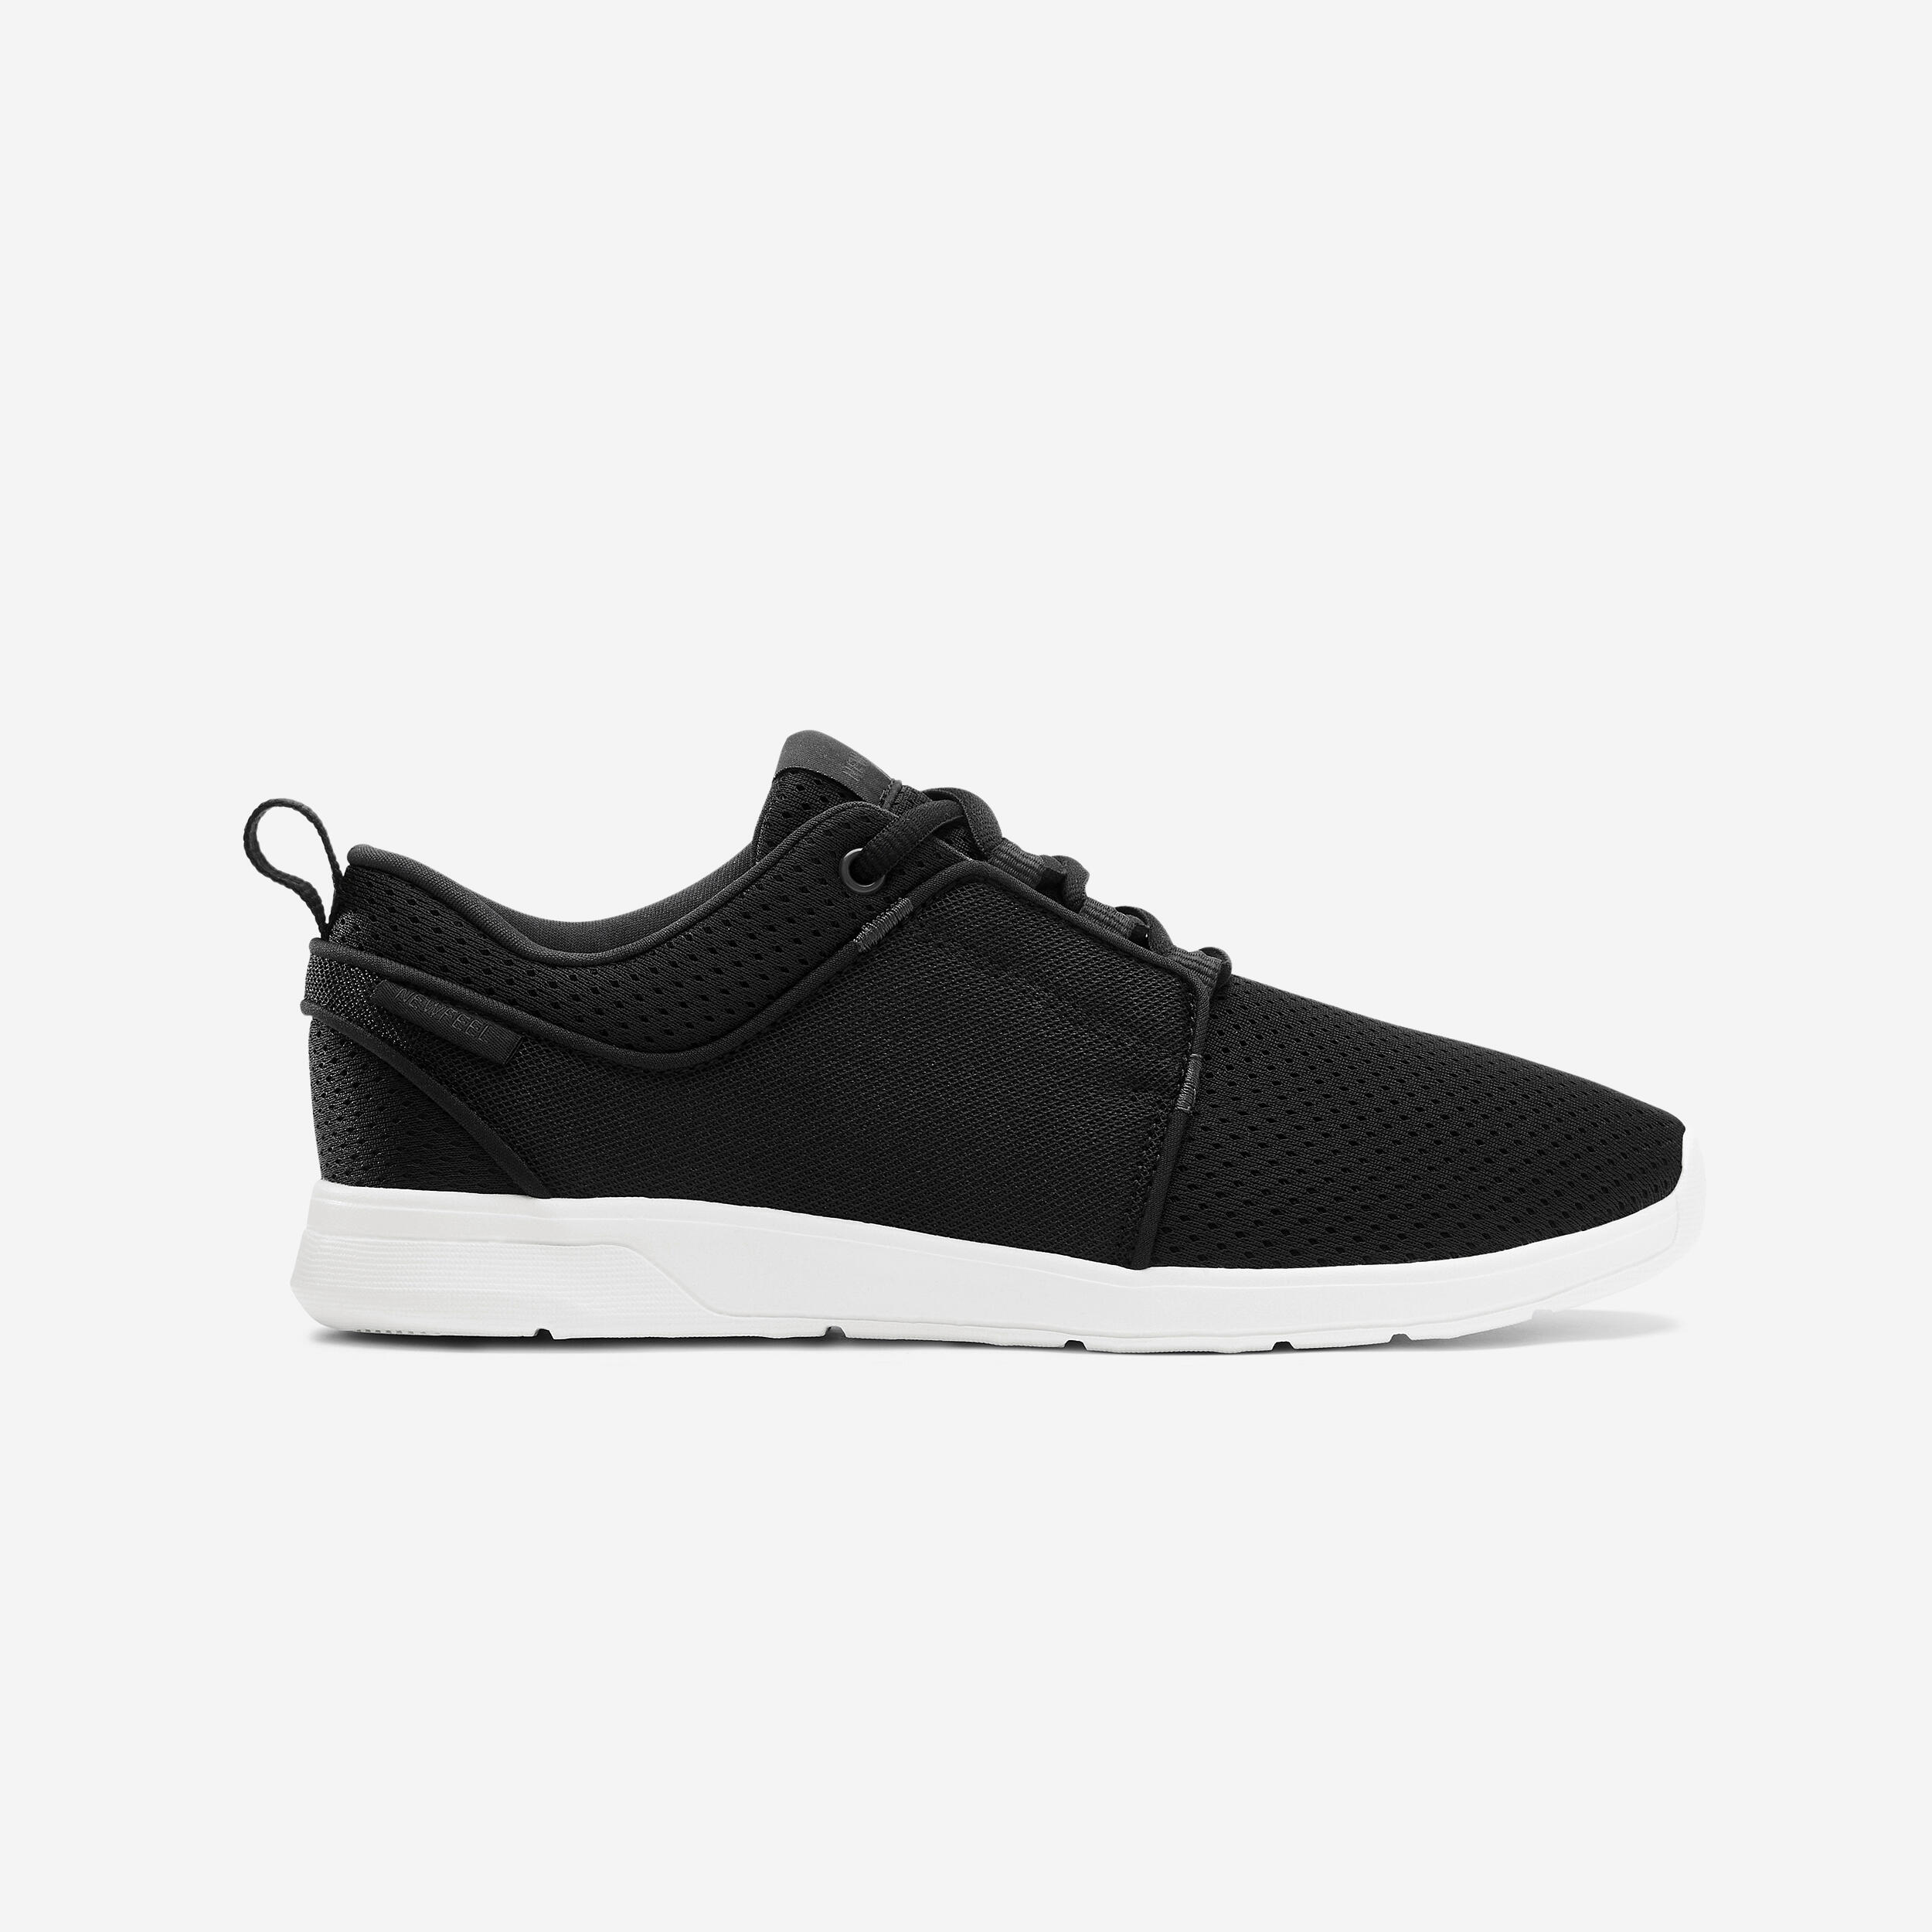 chaussures marche urbaine homme soft 140.2 mesh - newfeel